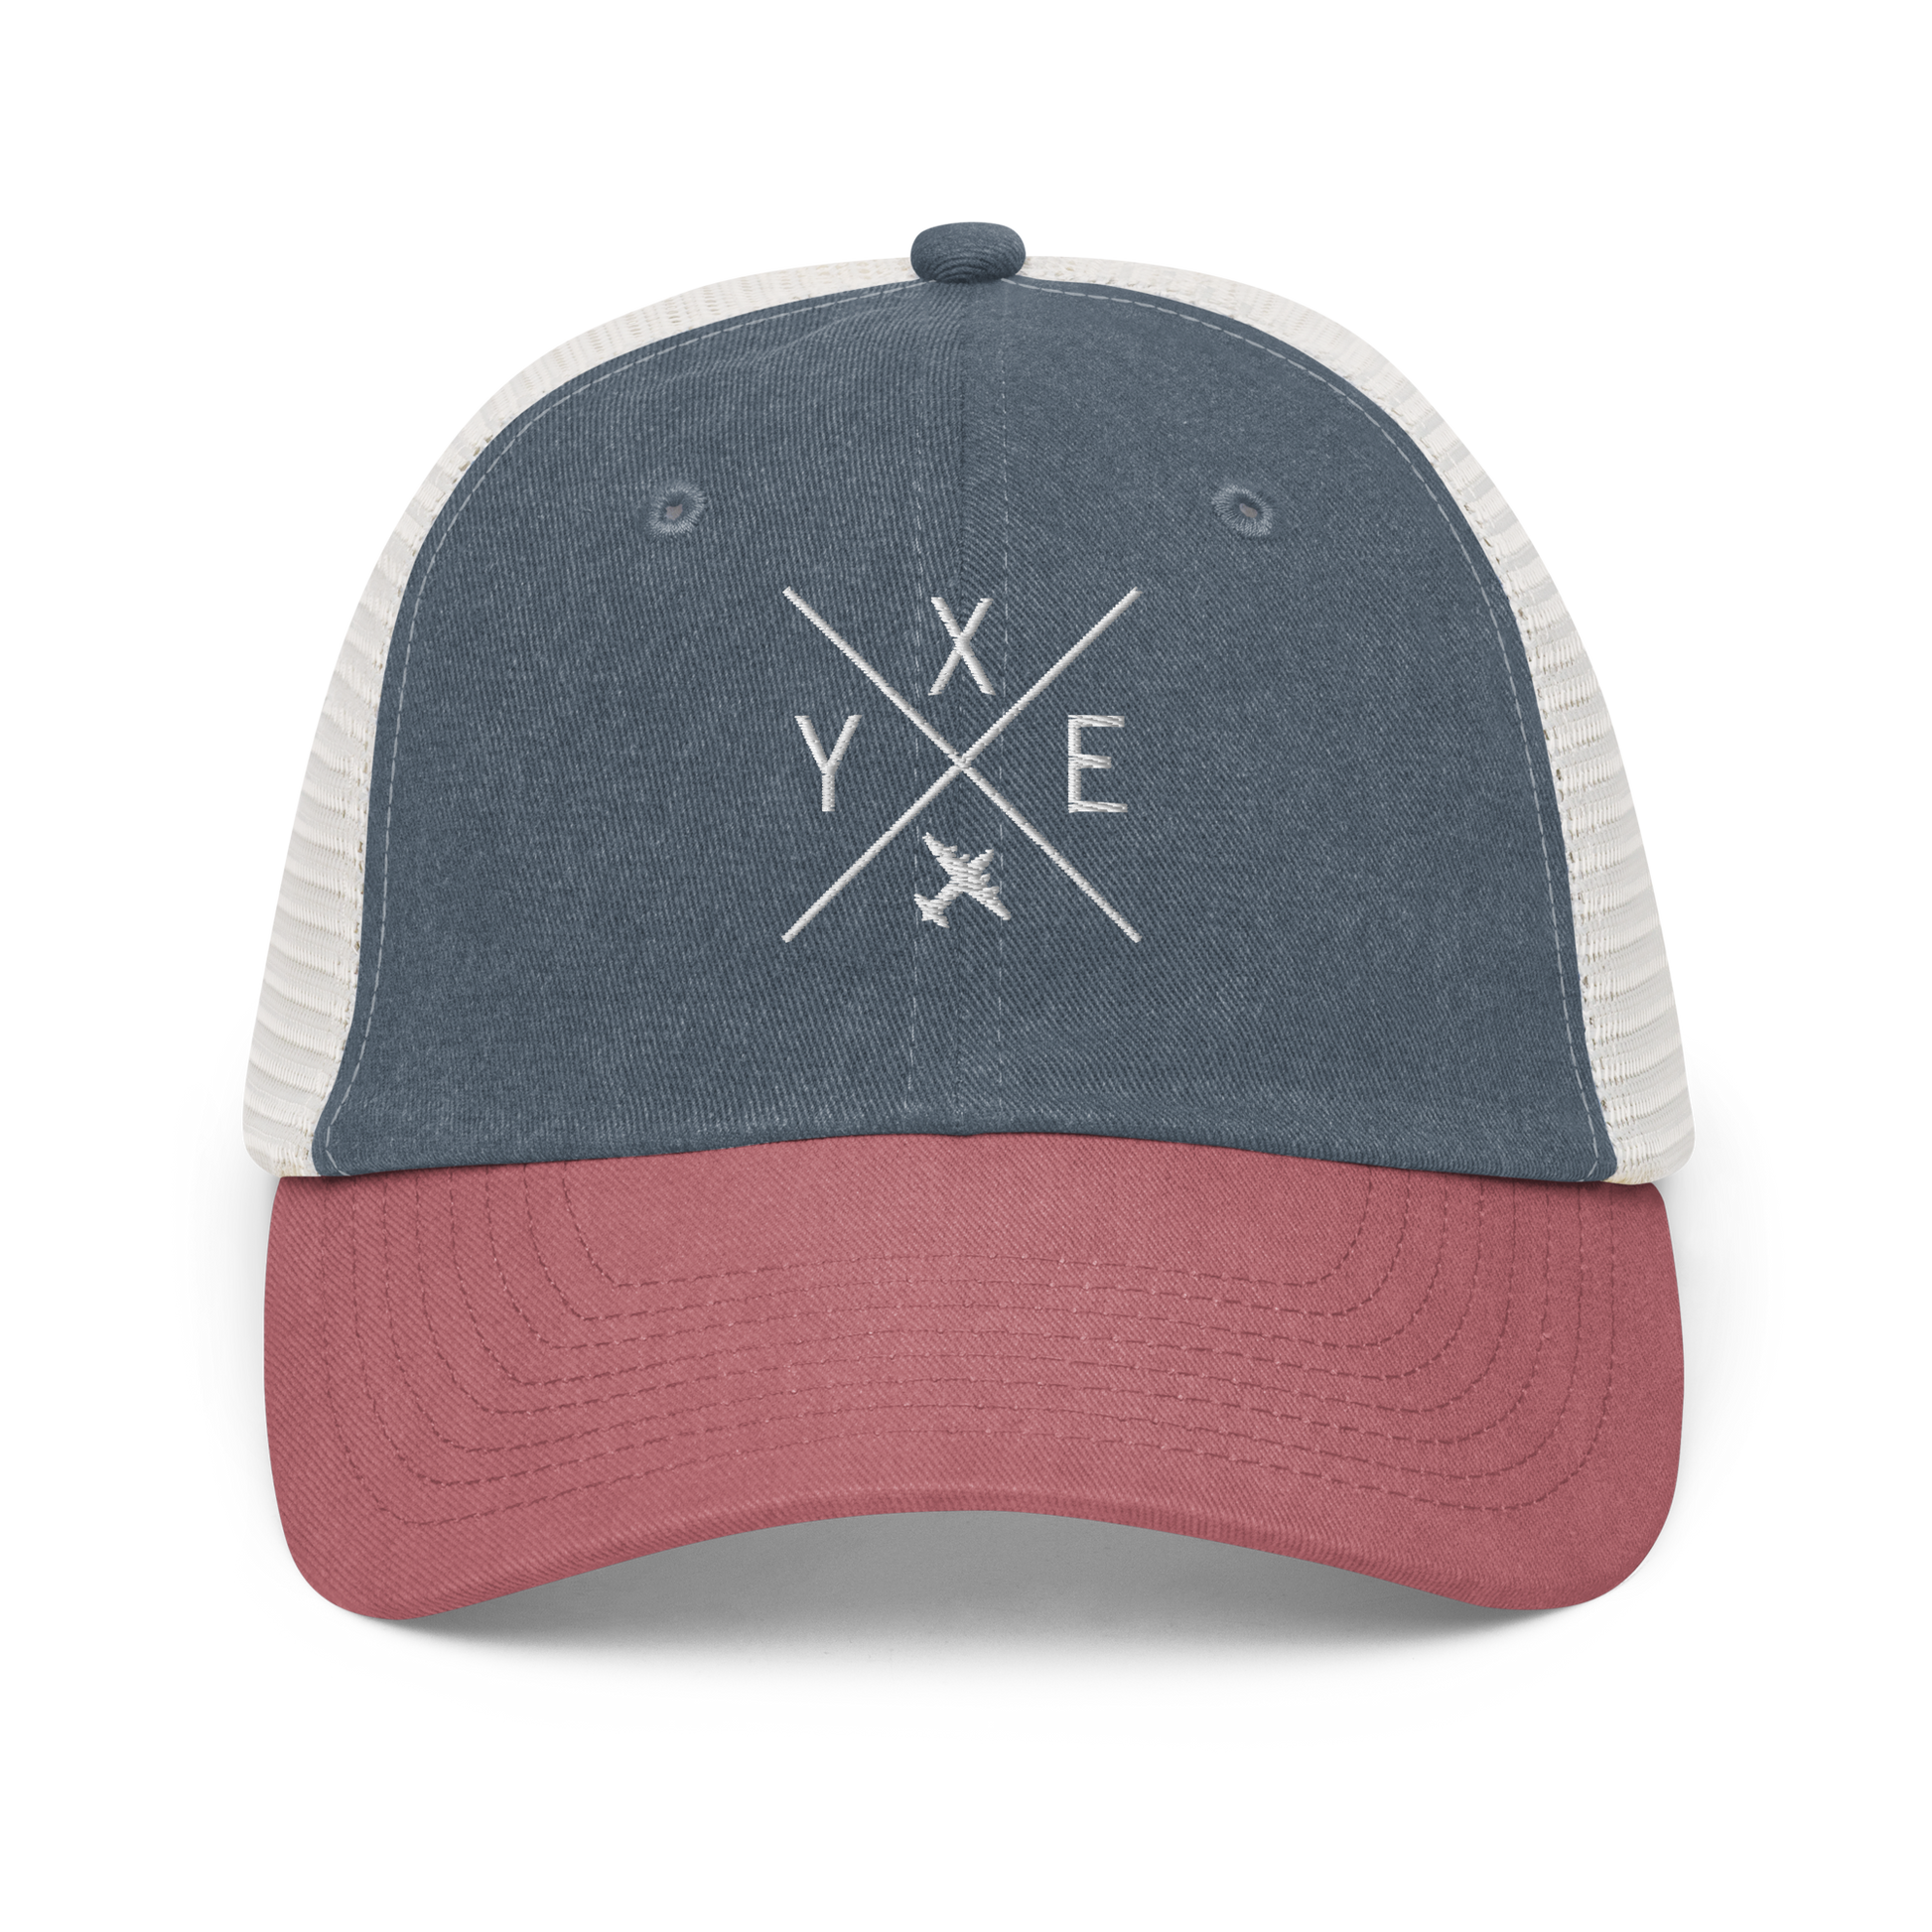 YHM Designs - YXE Saskatoon Pigment-Dyed Trucker Cap - Crossed-X Design with Airport Code and Vintage Propliner - White Embroidery - Image 12